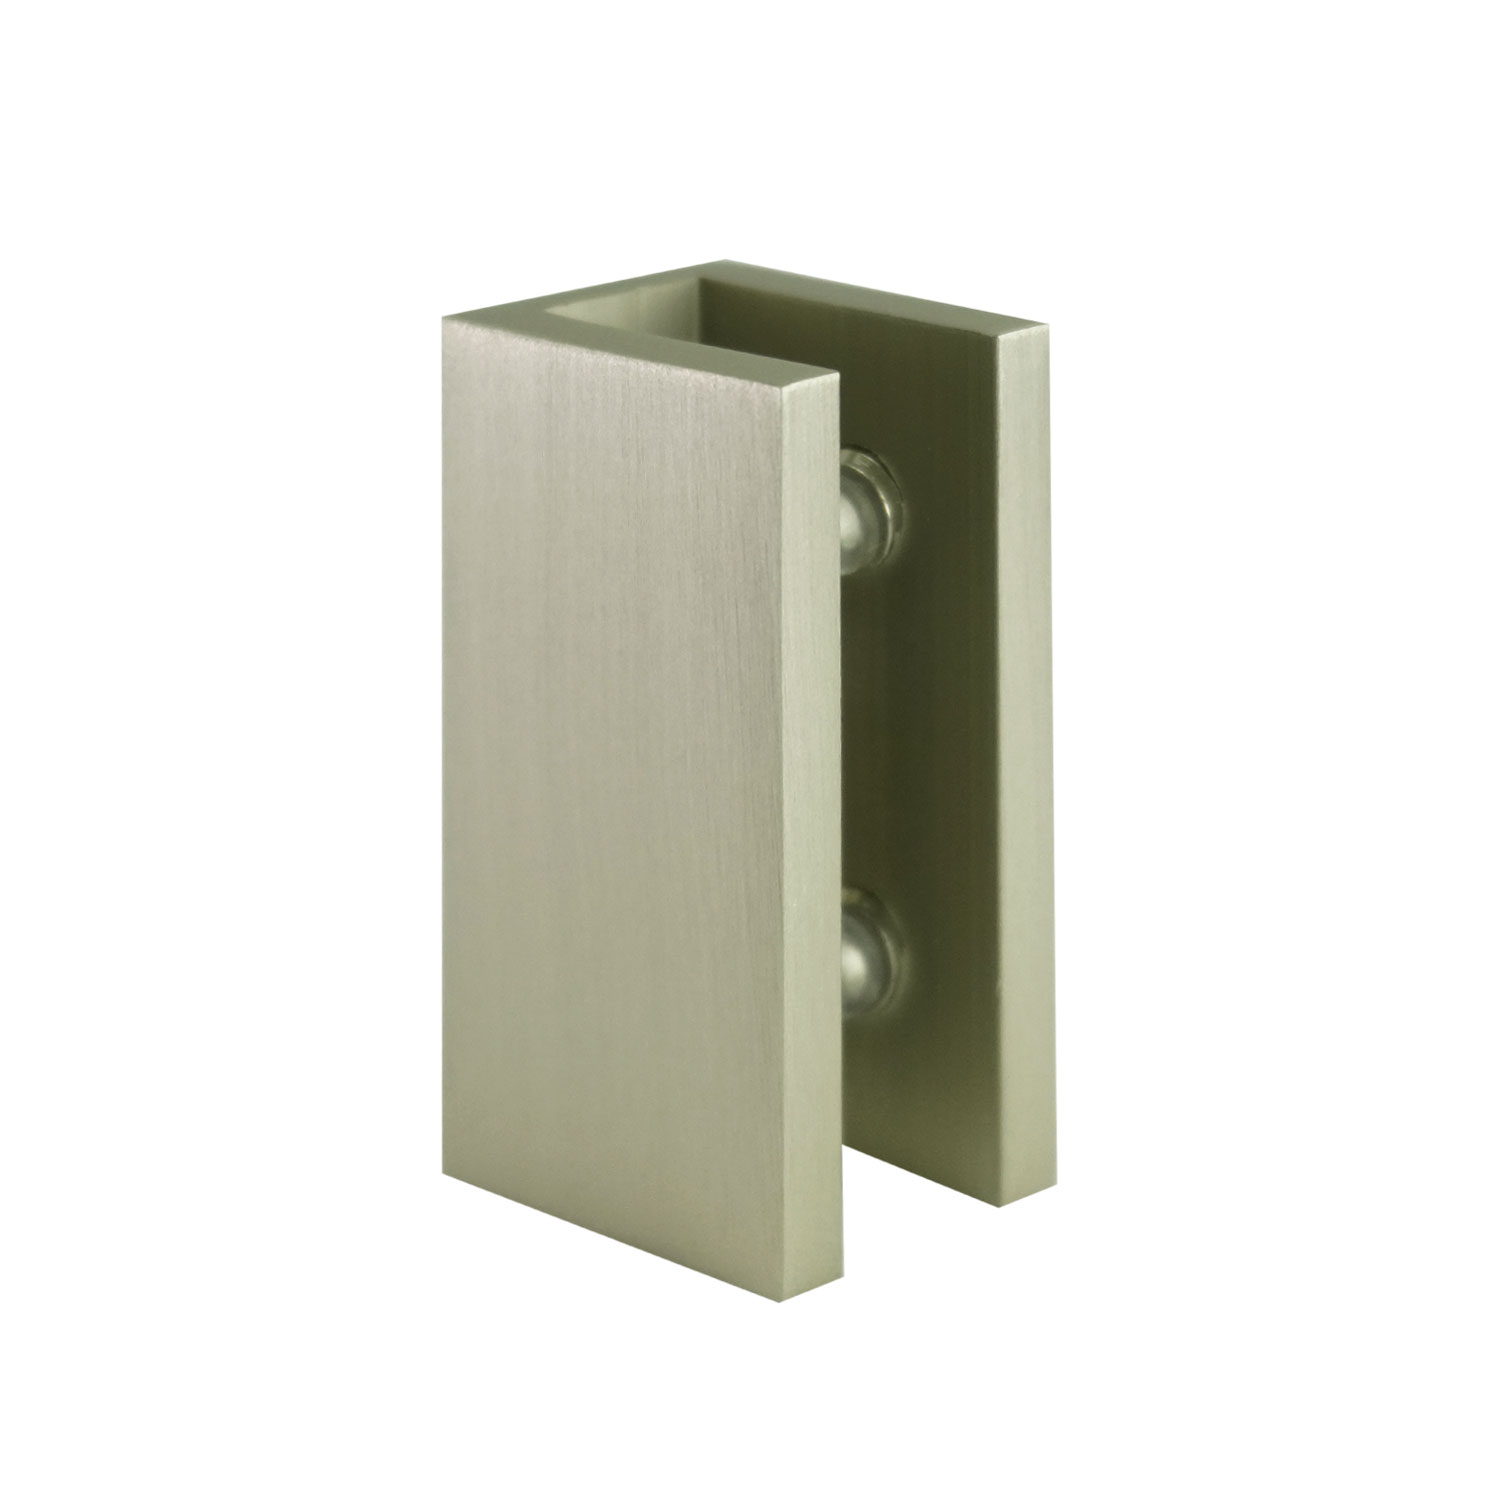 Glass to Wall/Floor U-Clamp 25mm x 50mm (Brushed Nickel)